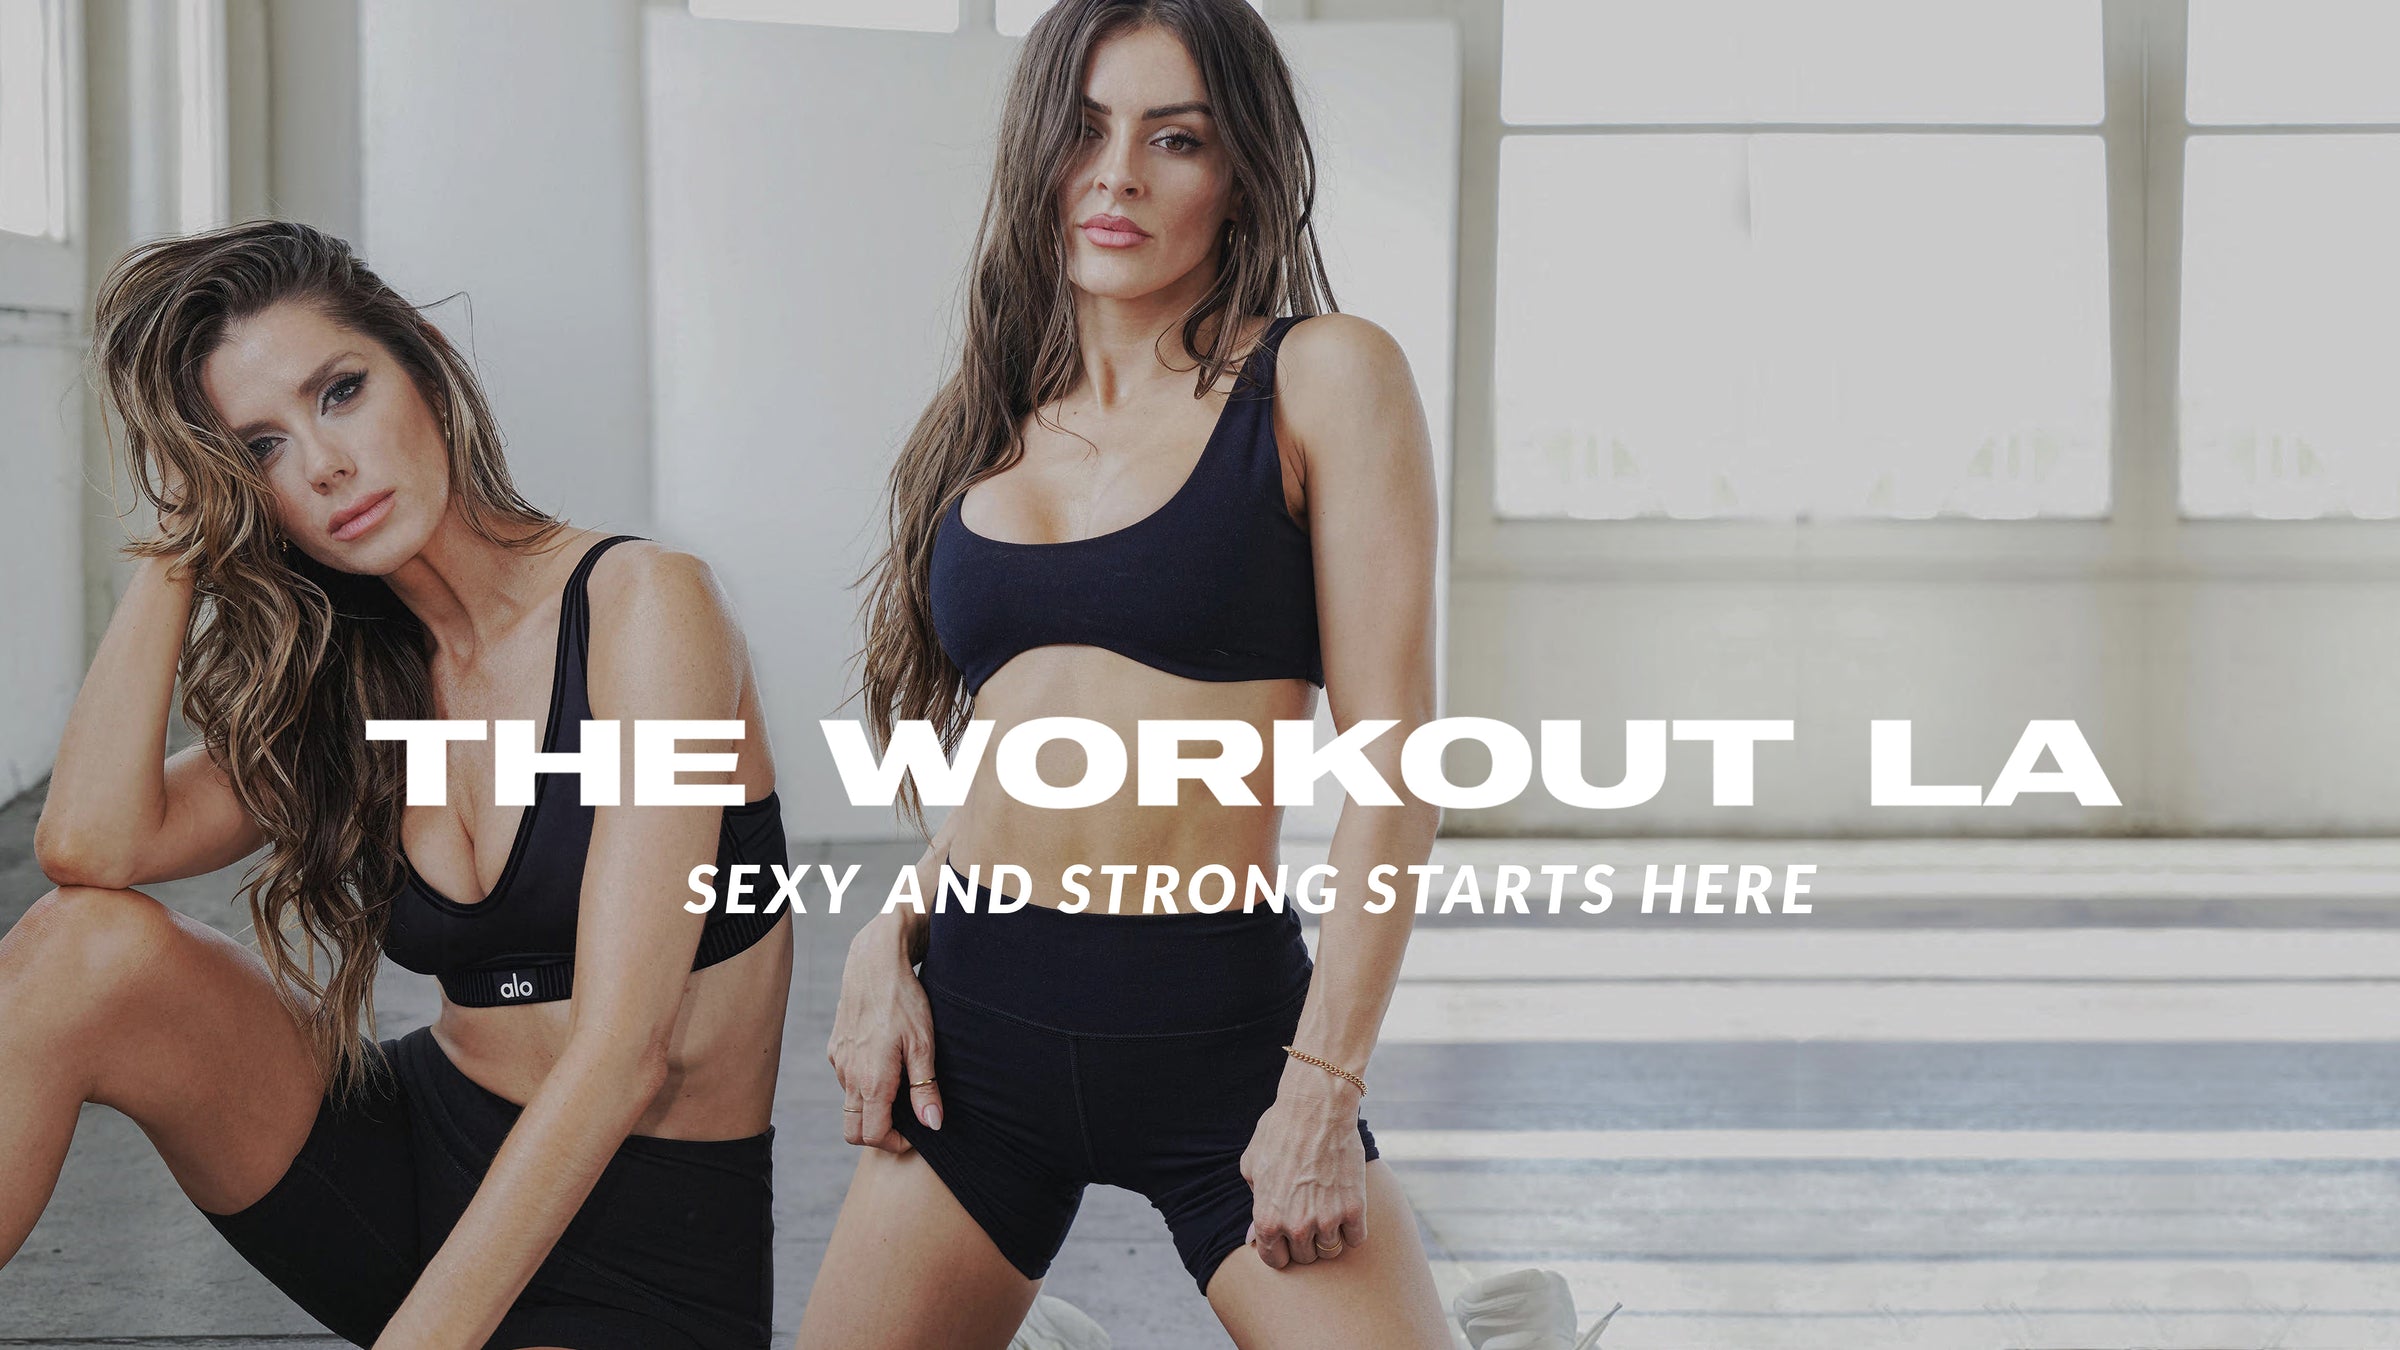 header photo with two trainers with the workout la sexy starts here writing on image